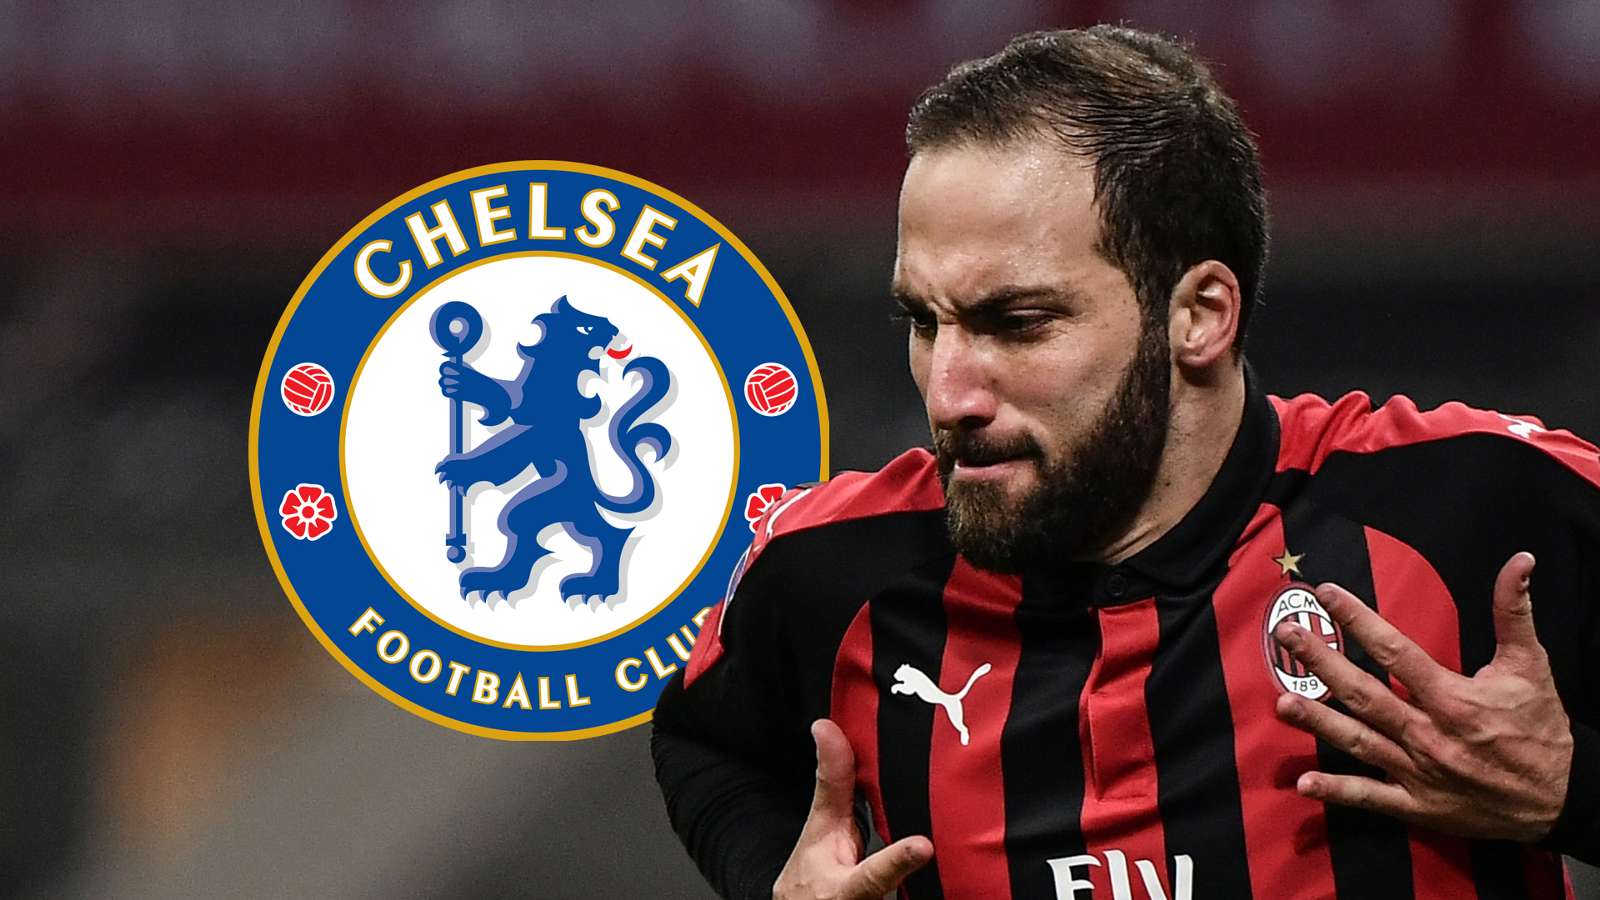 Chelsea closing in on Higuain as agreement reached with Juventus